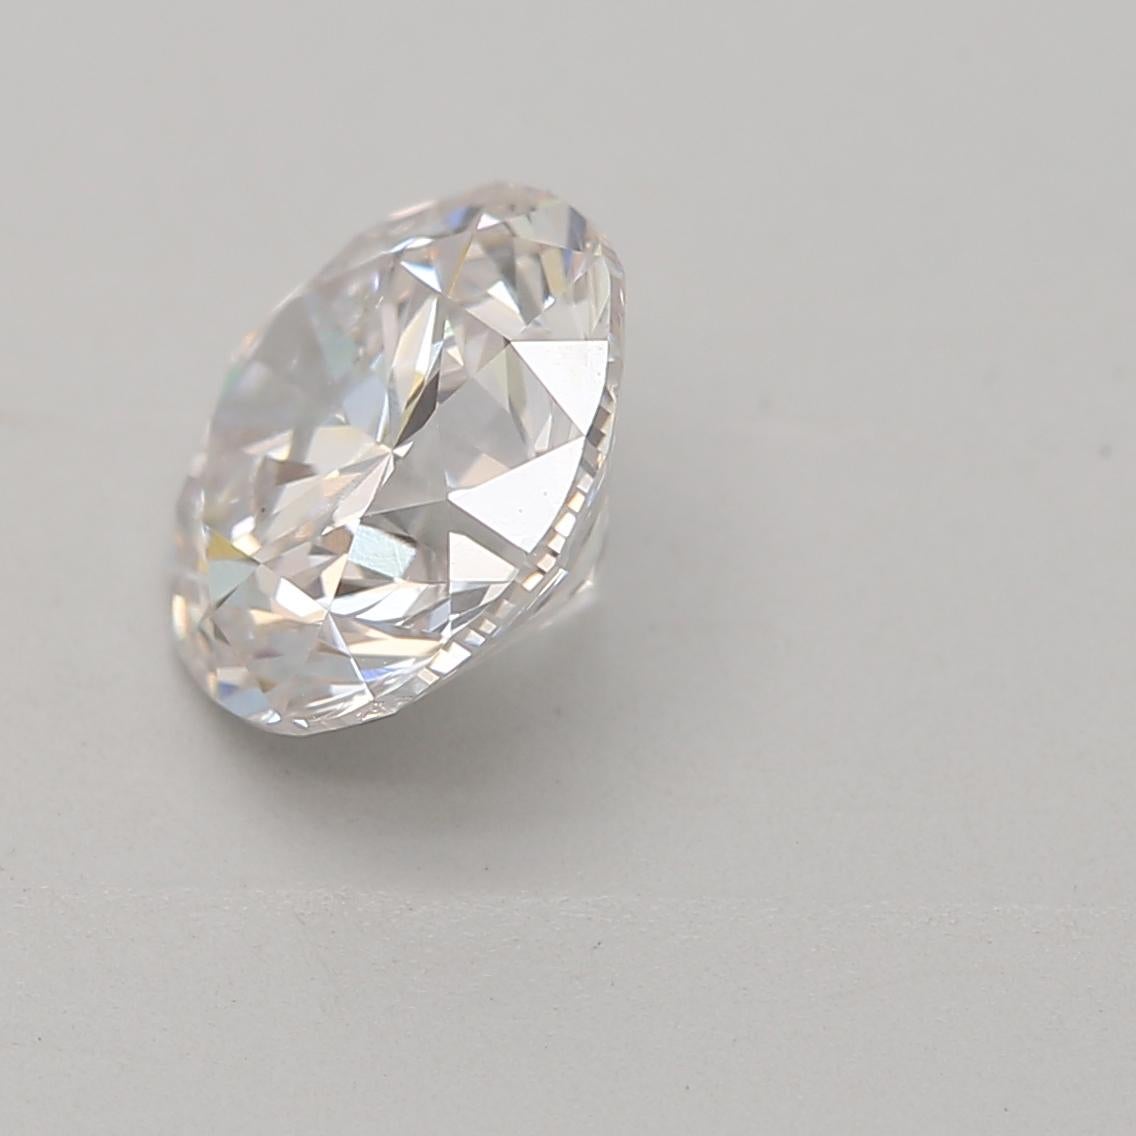 1 Carat Faint Pinkish Brown Round Cut Diamond SI2 Clarity GIA Certified In New Condition For Sale In Kowloon, HK